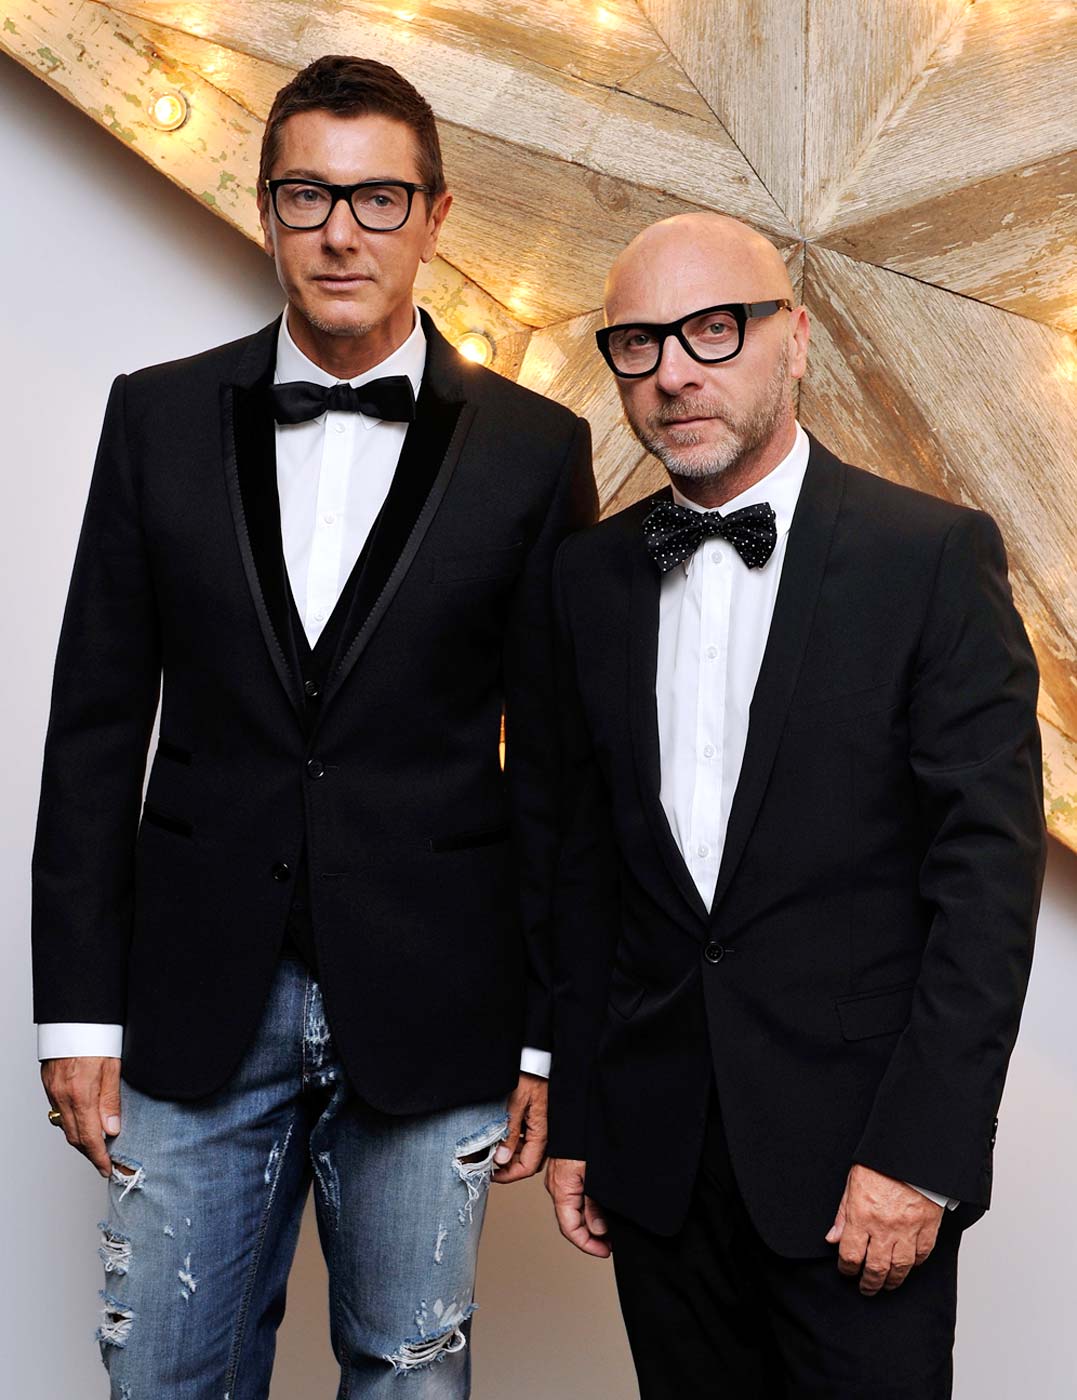 dolce and gabbana images